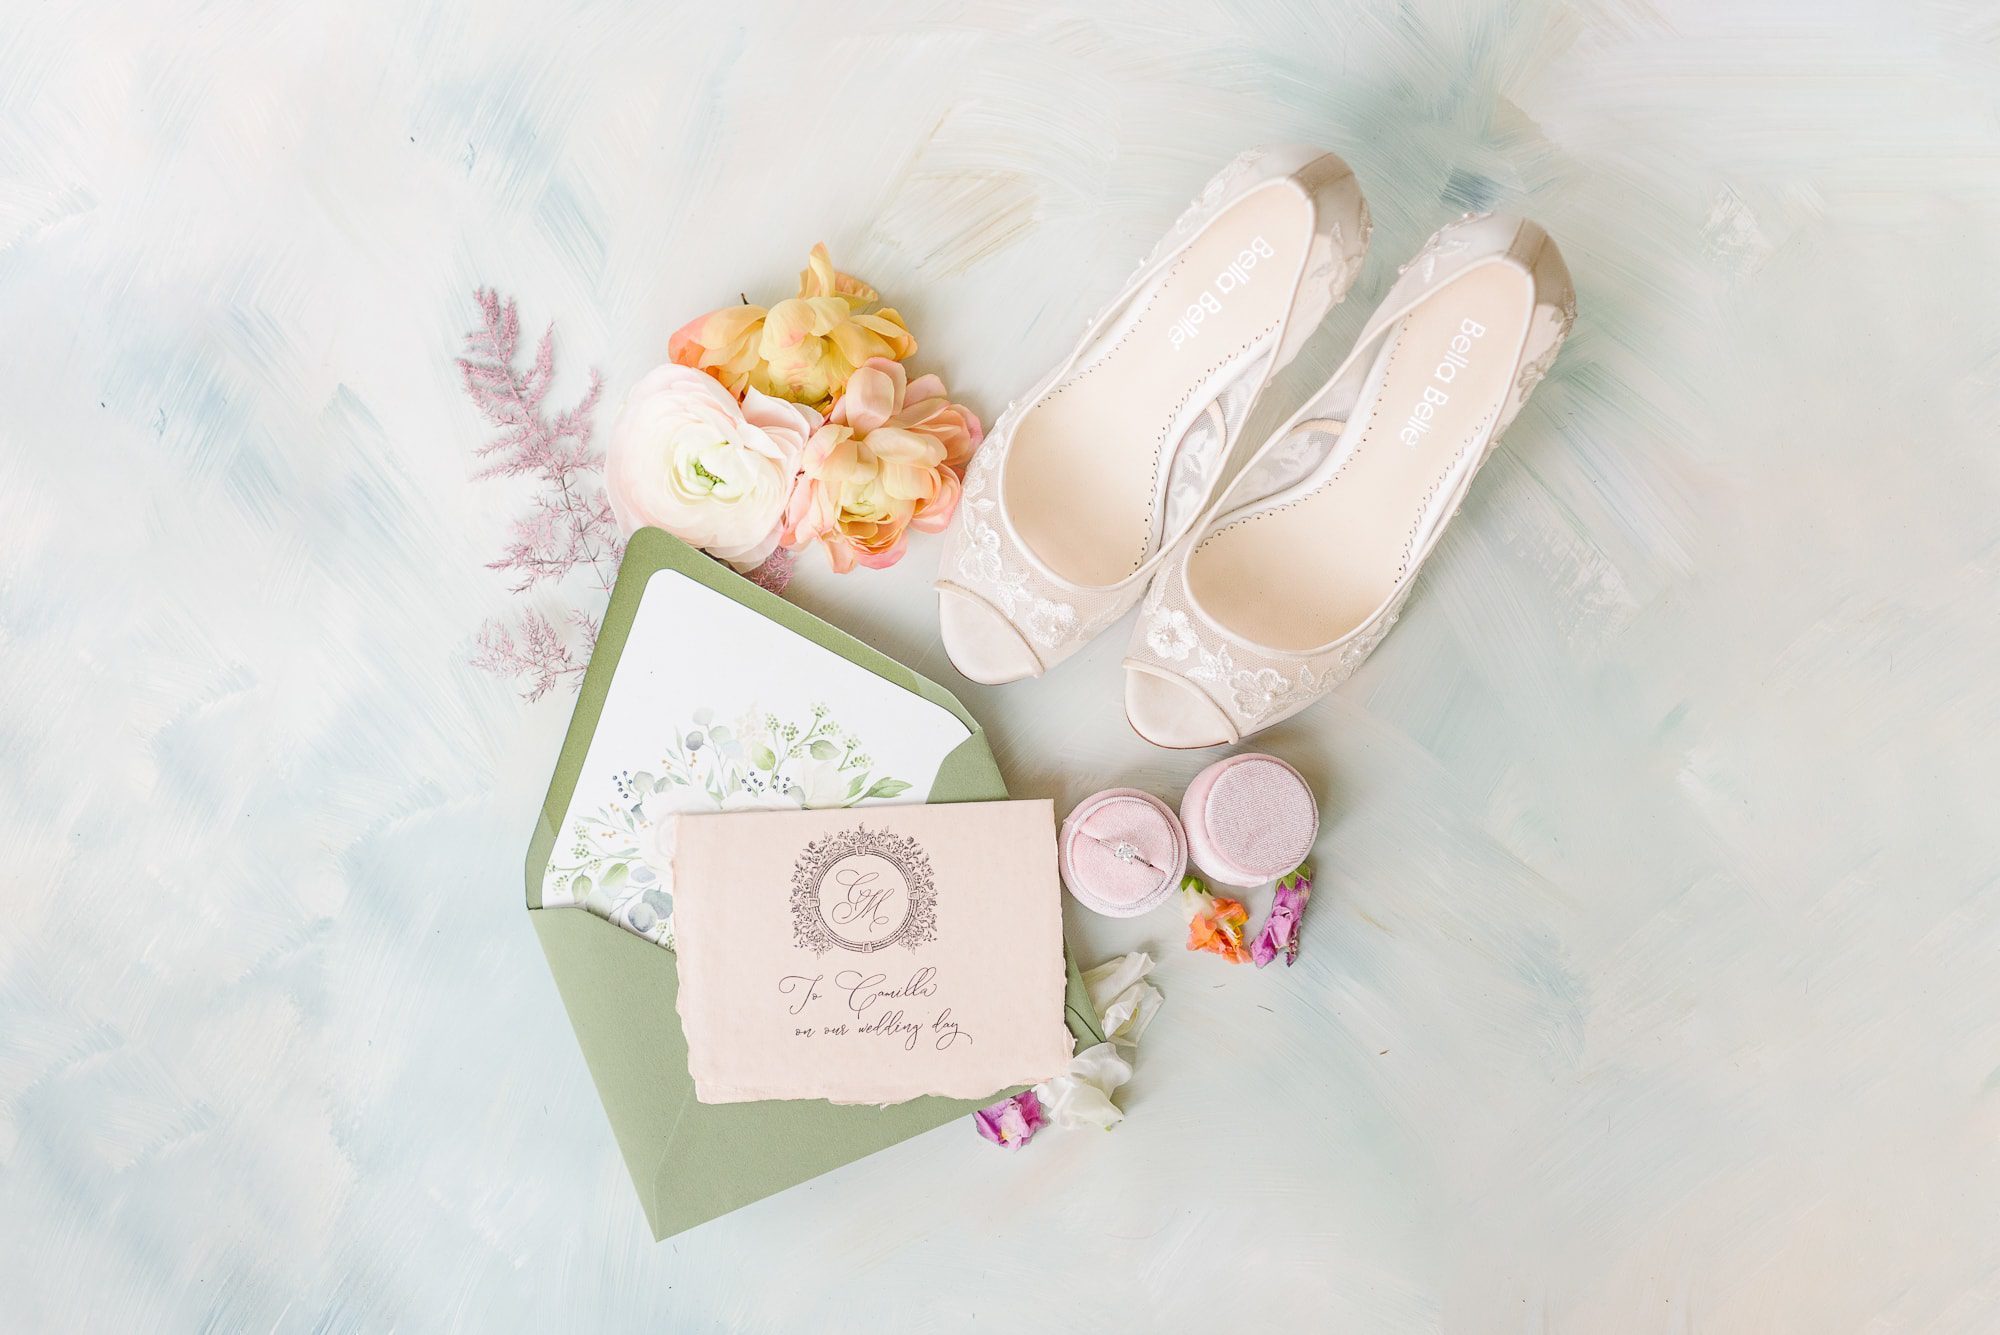 A green envelope, purple flowers, and white wedding shoes are styled artistically.